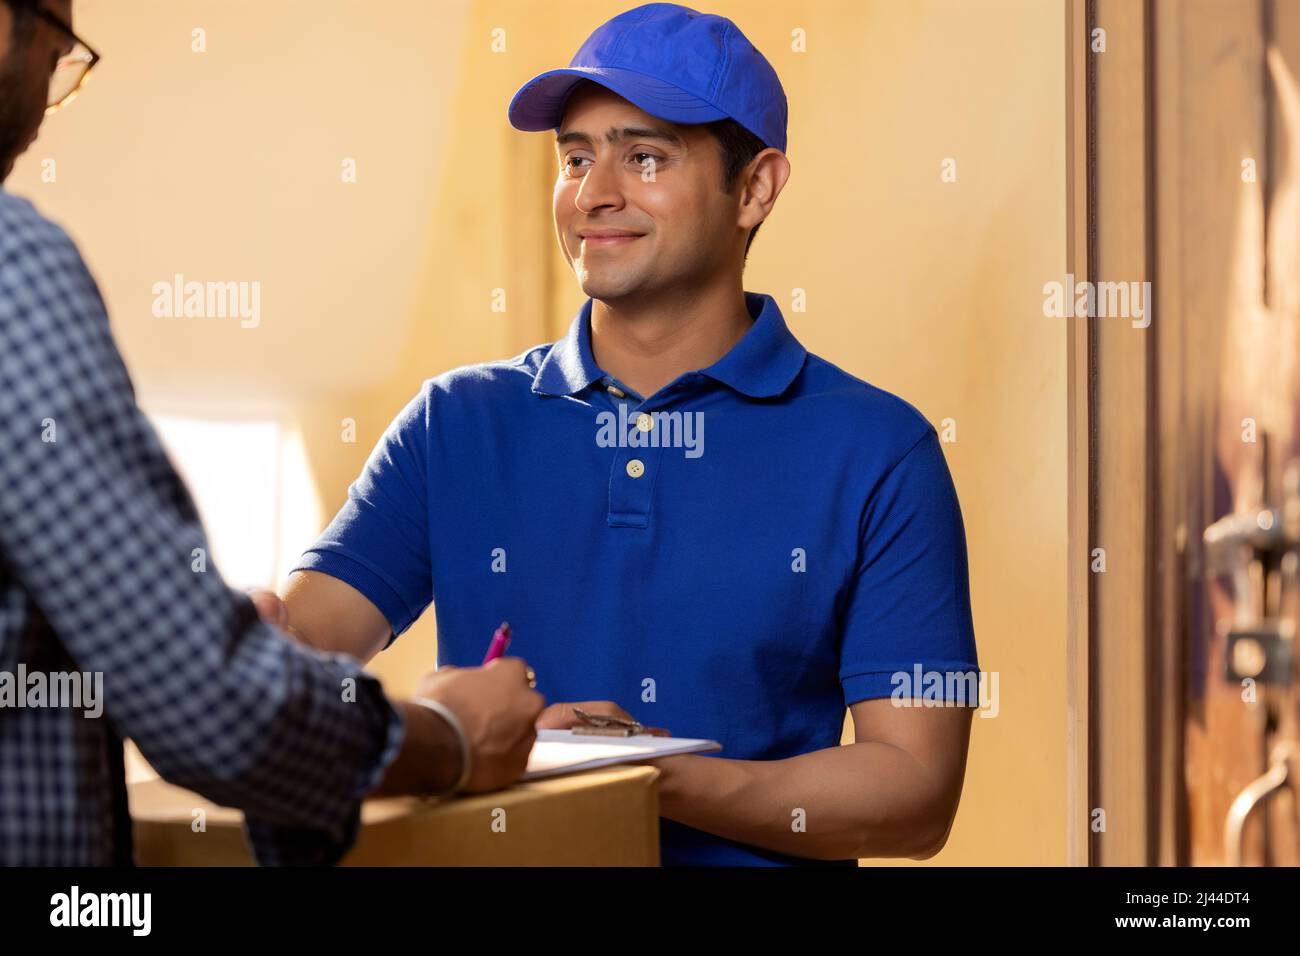 Customer signing the receipt after receiving his parcel from the delivery boy Stock Photo